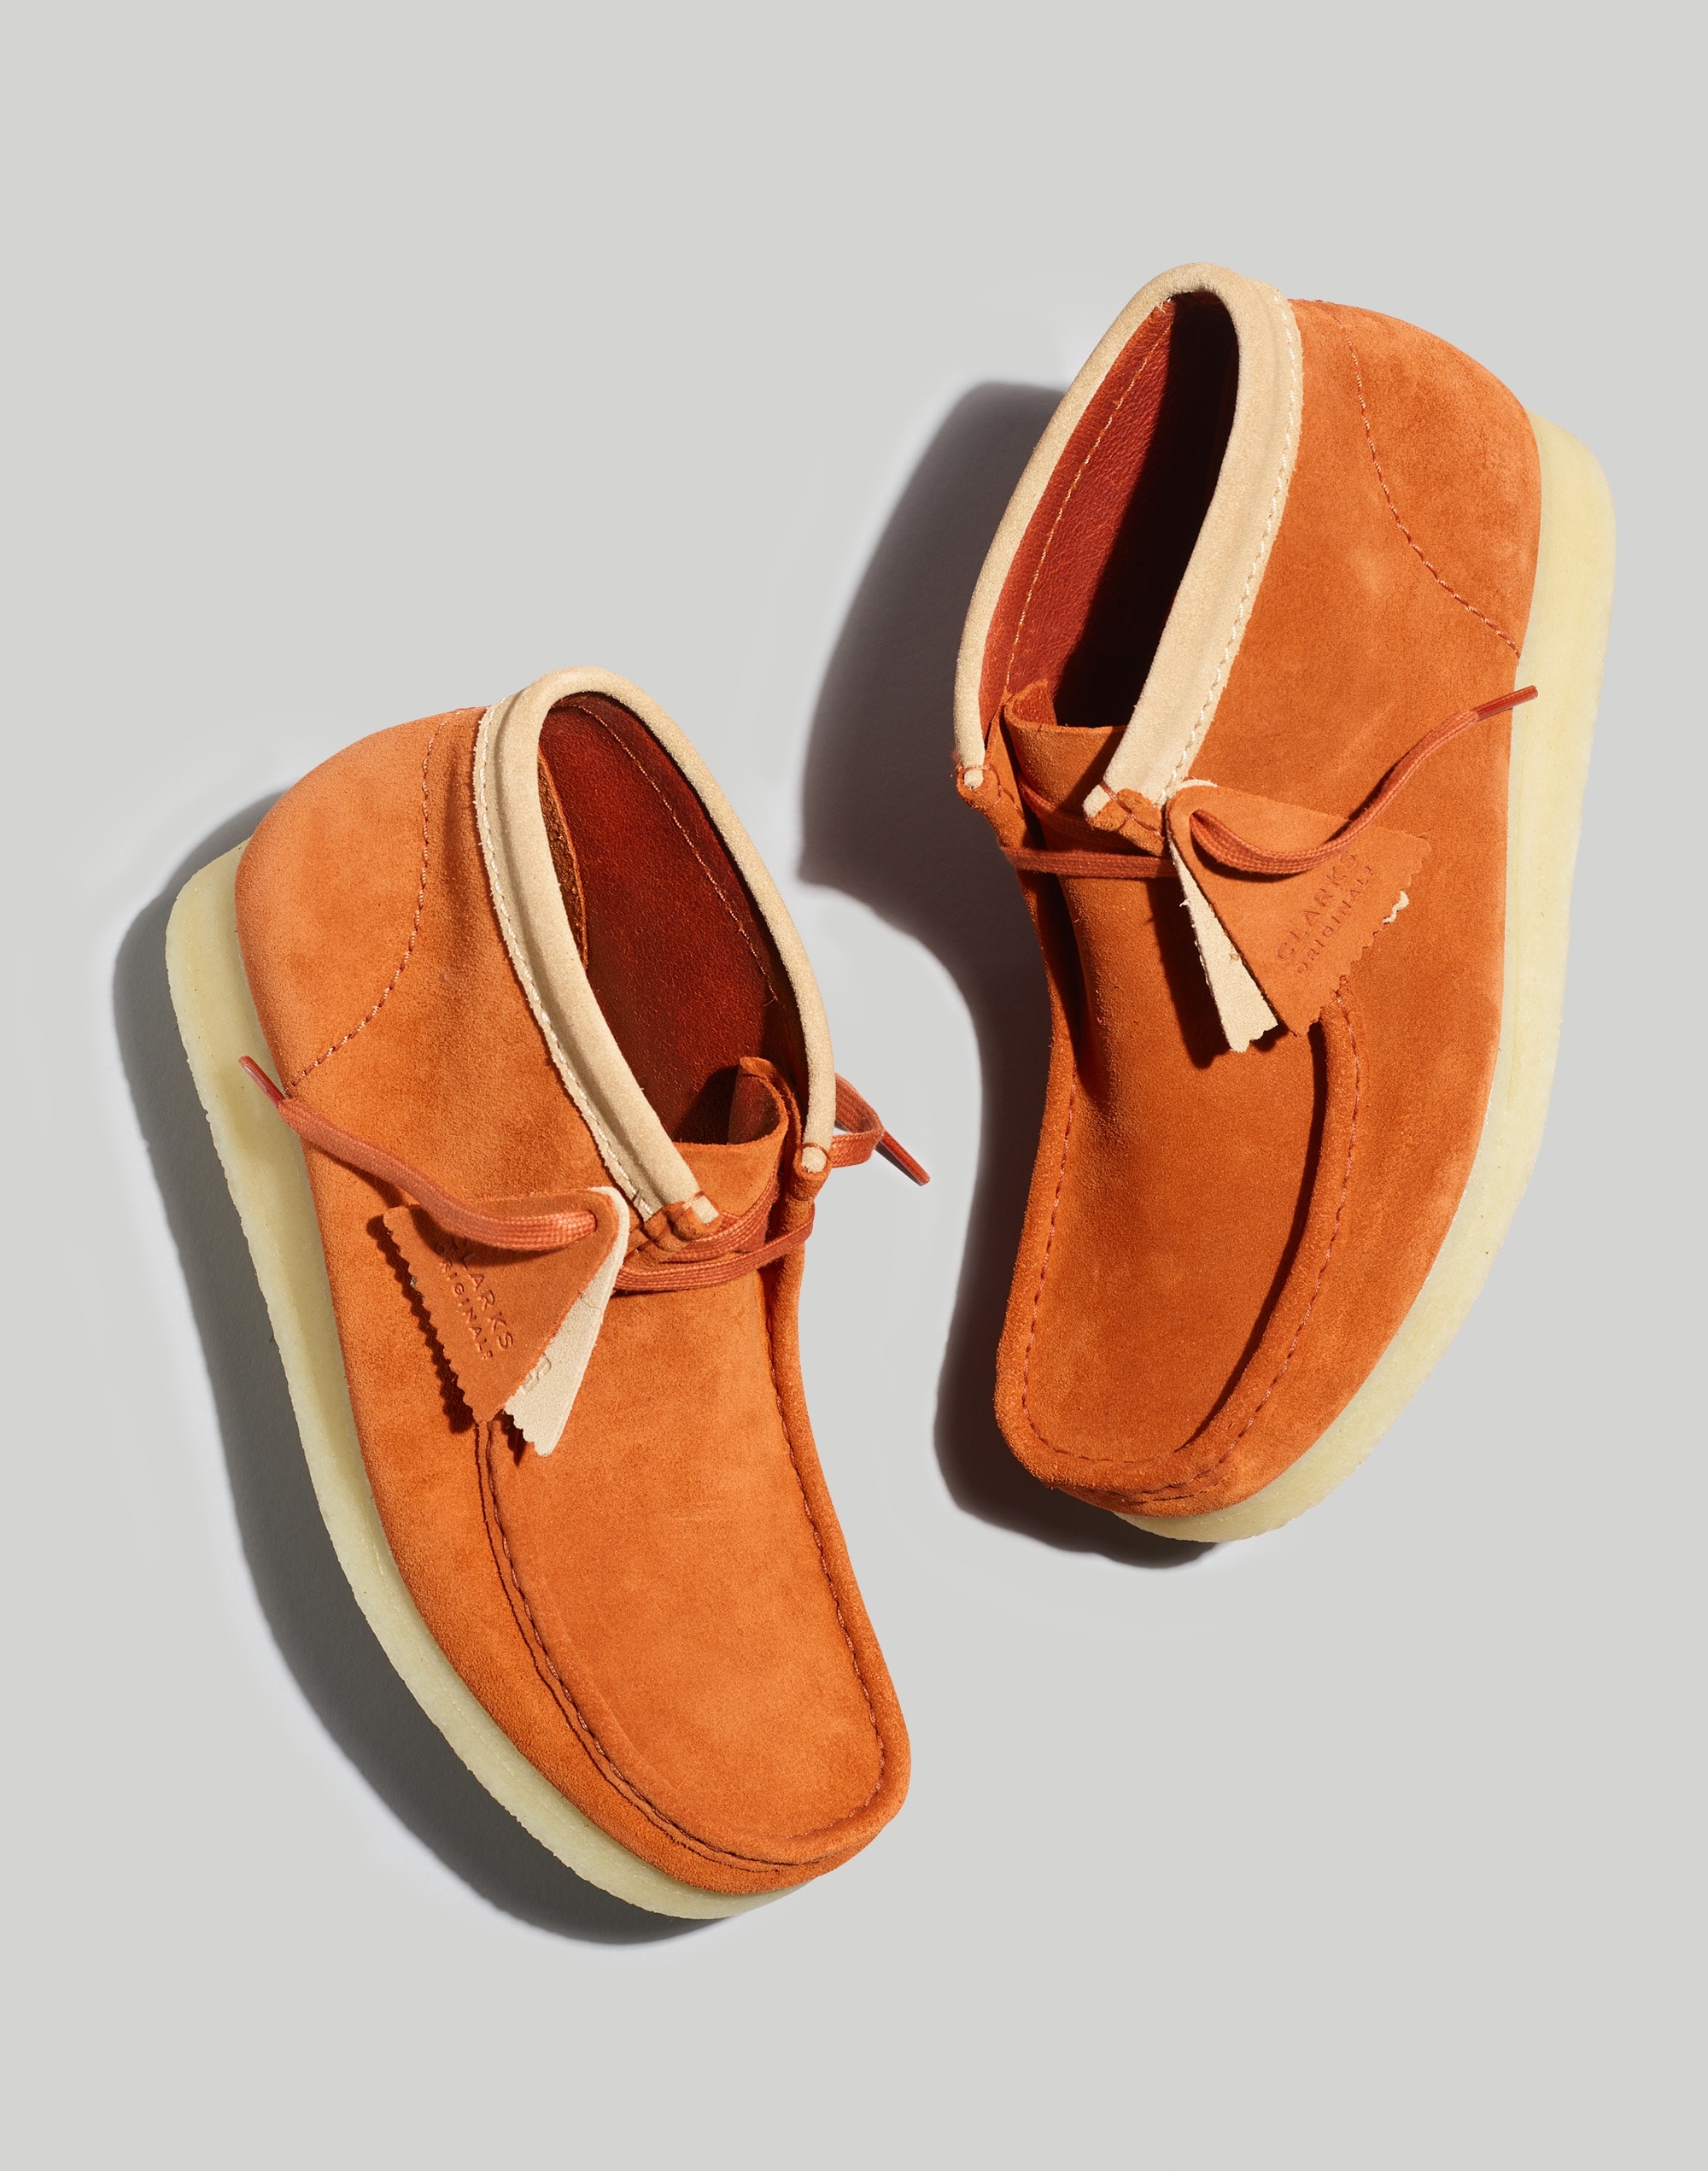 Clarks® Suede Wallabee Boots